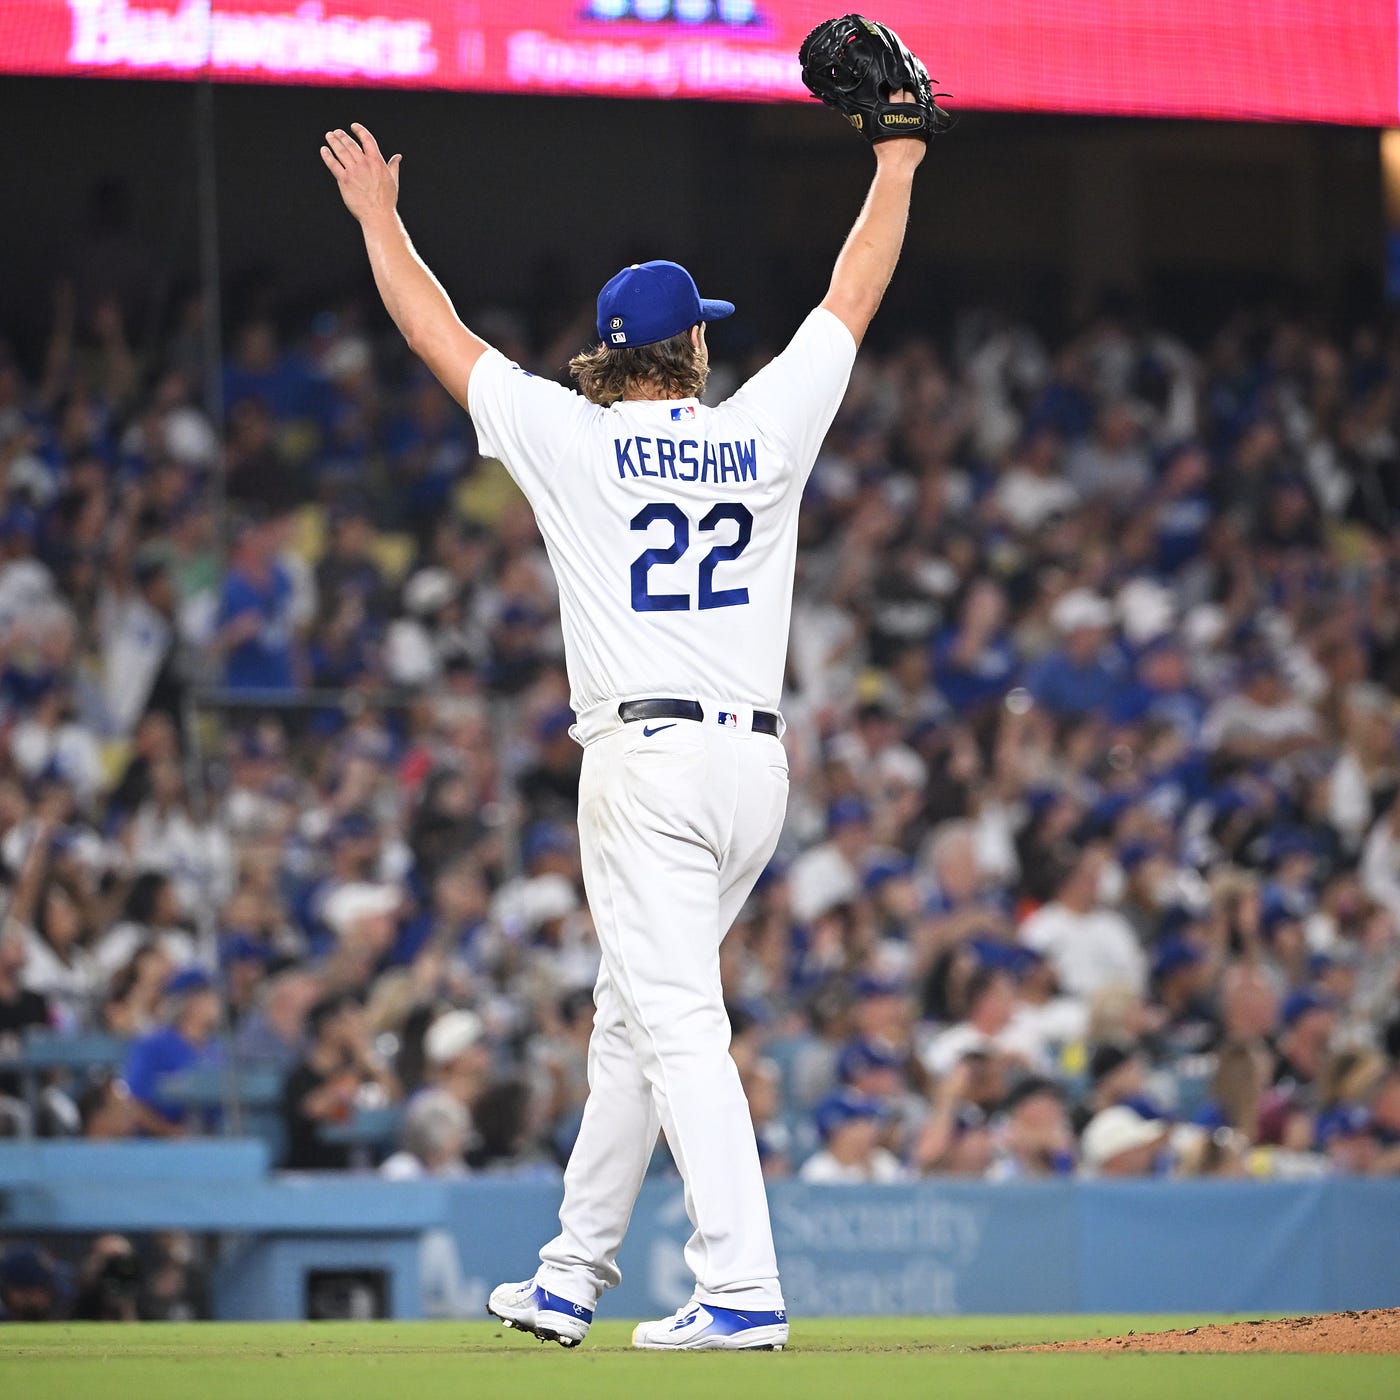 Play Ball!: The Dodgers have plenty of promotions this summer, Sports